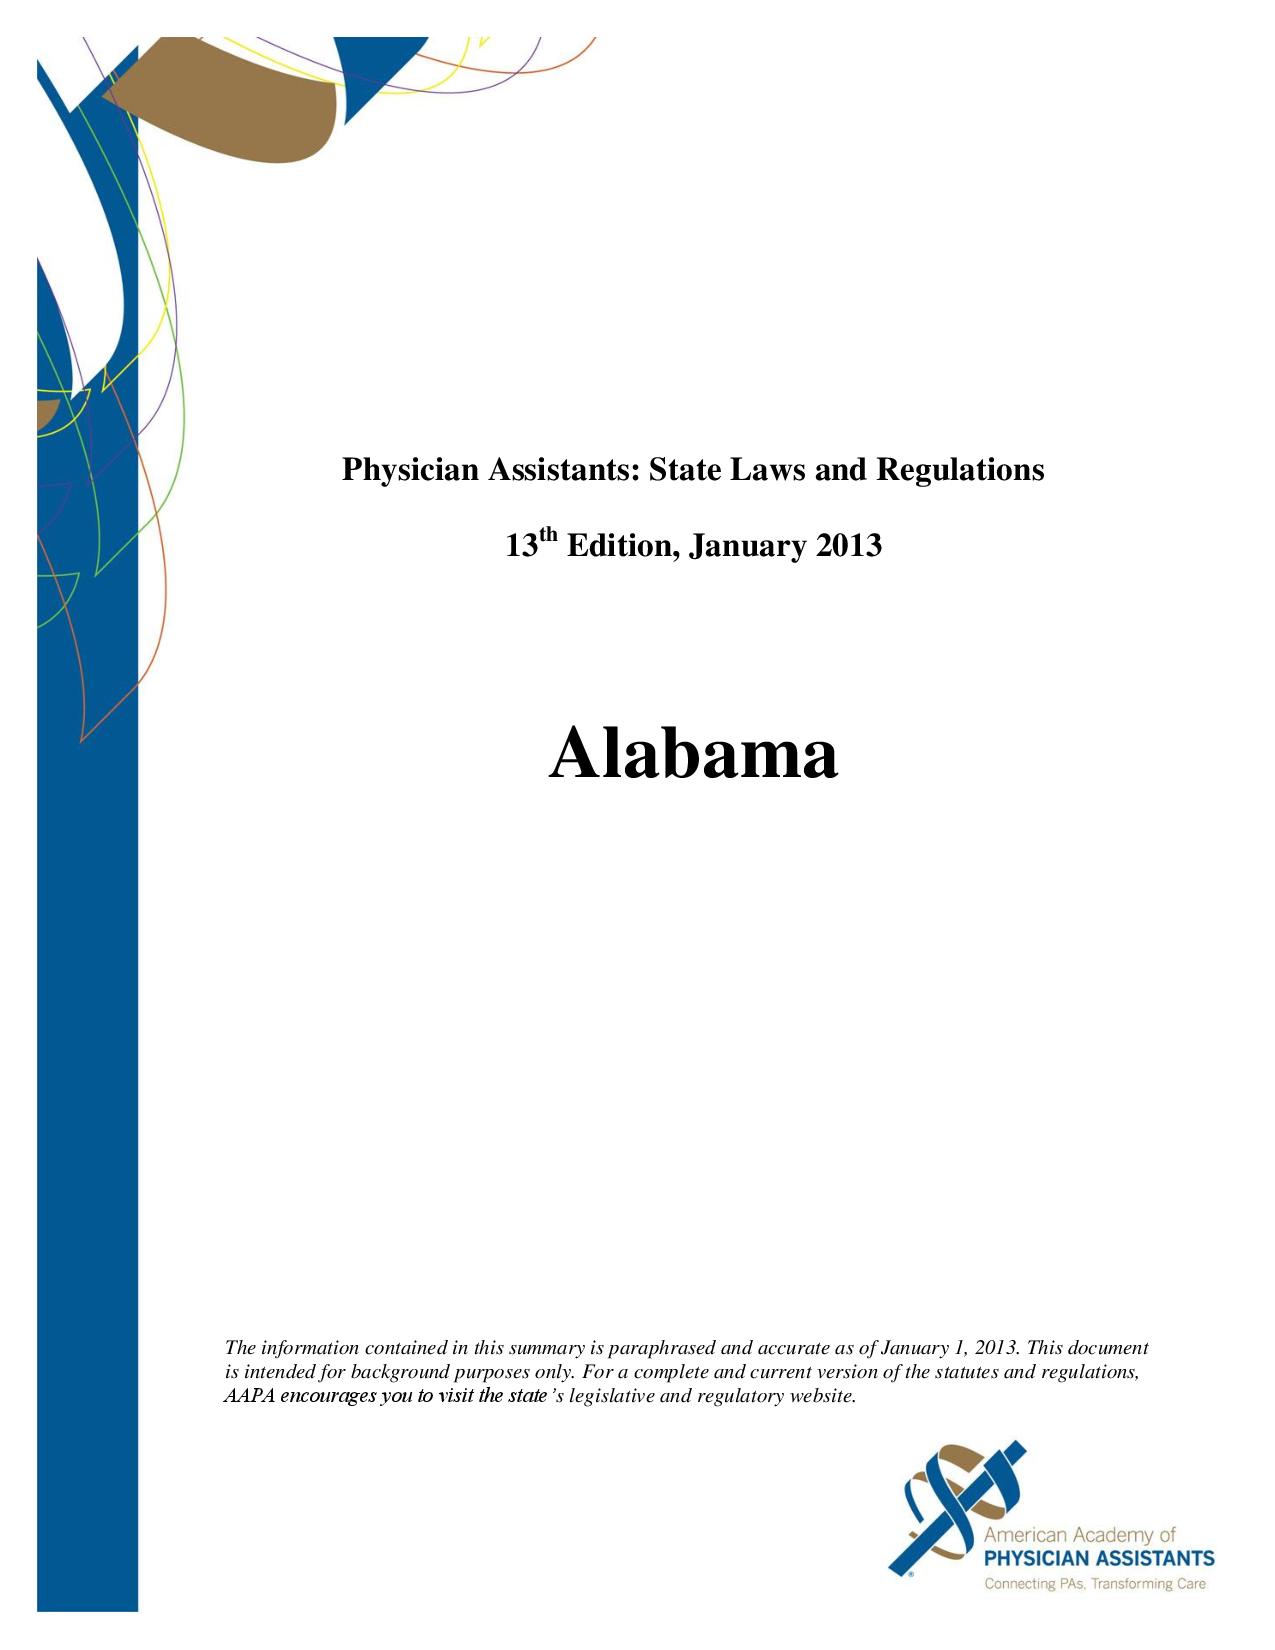 PA: State Laws and Regulations 13th Edition